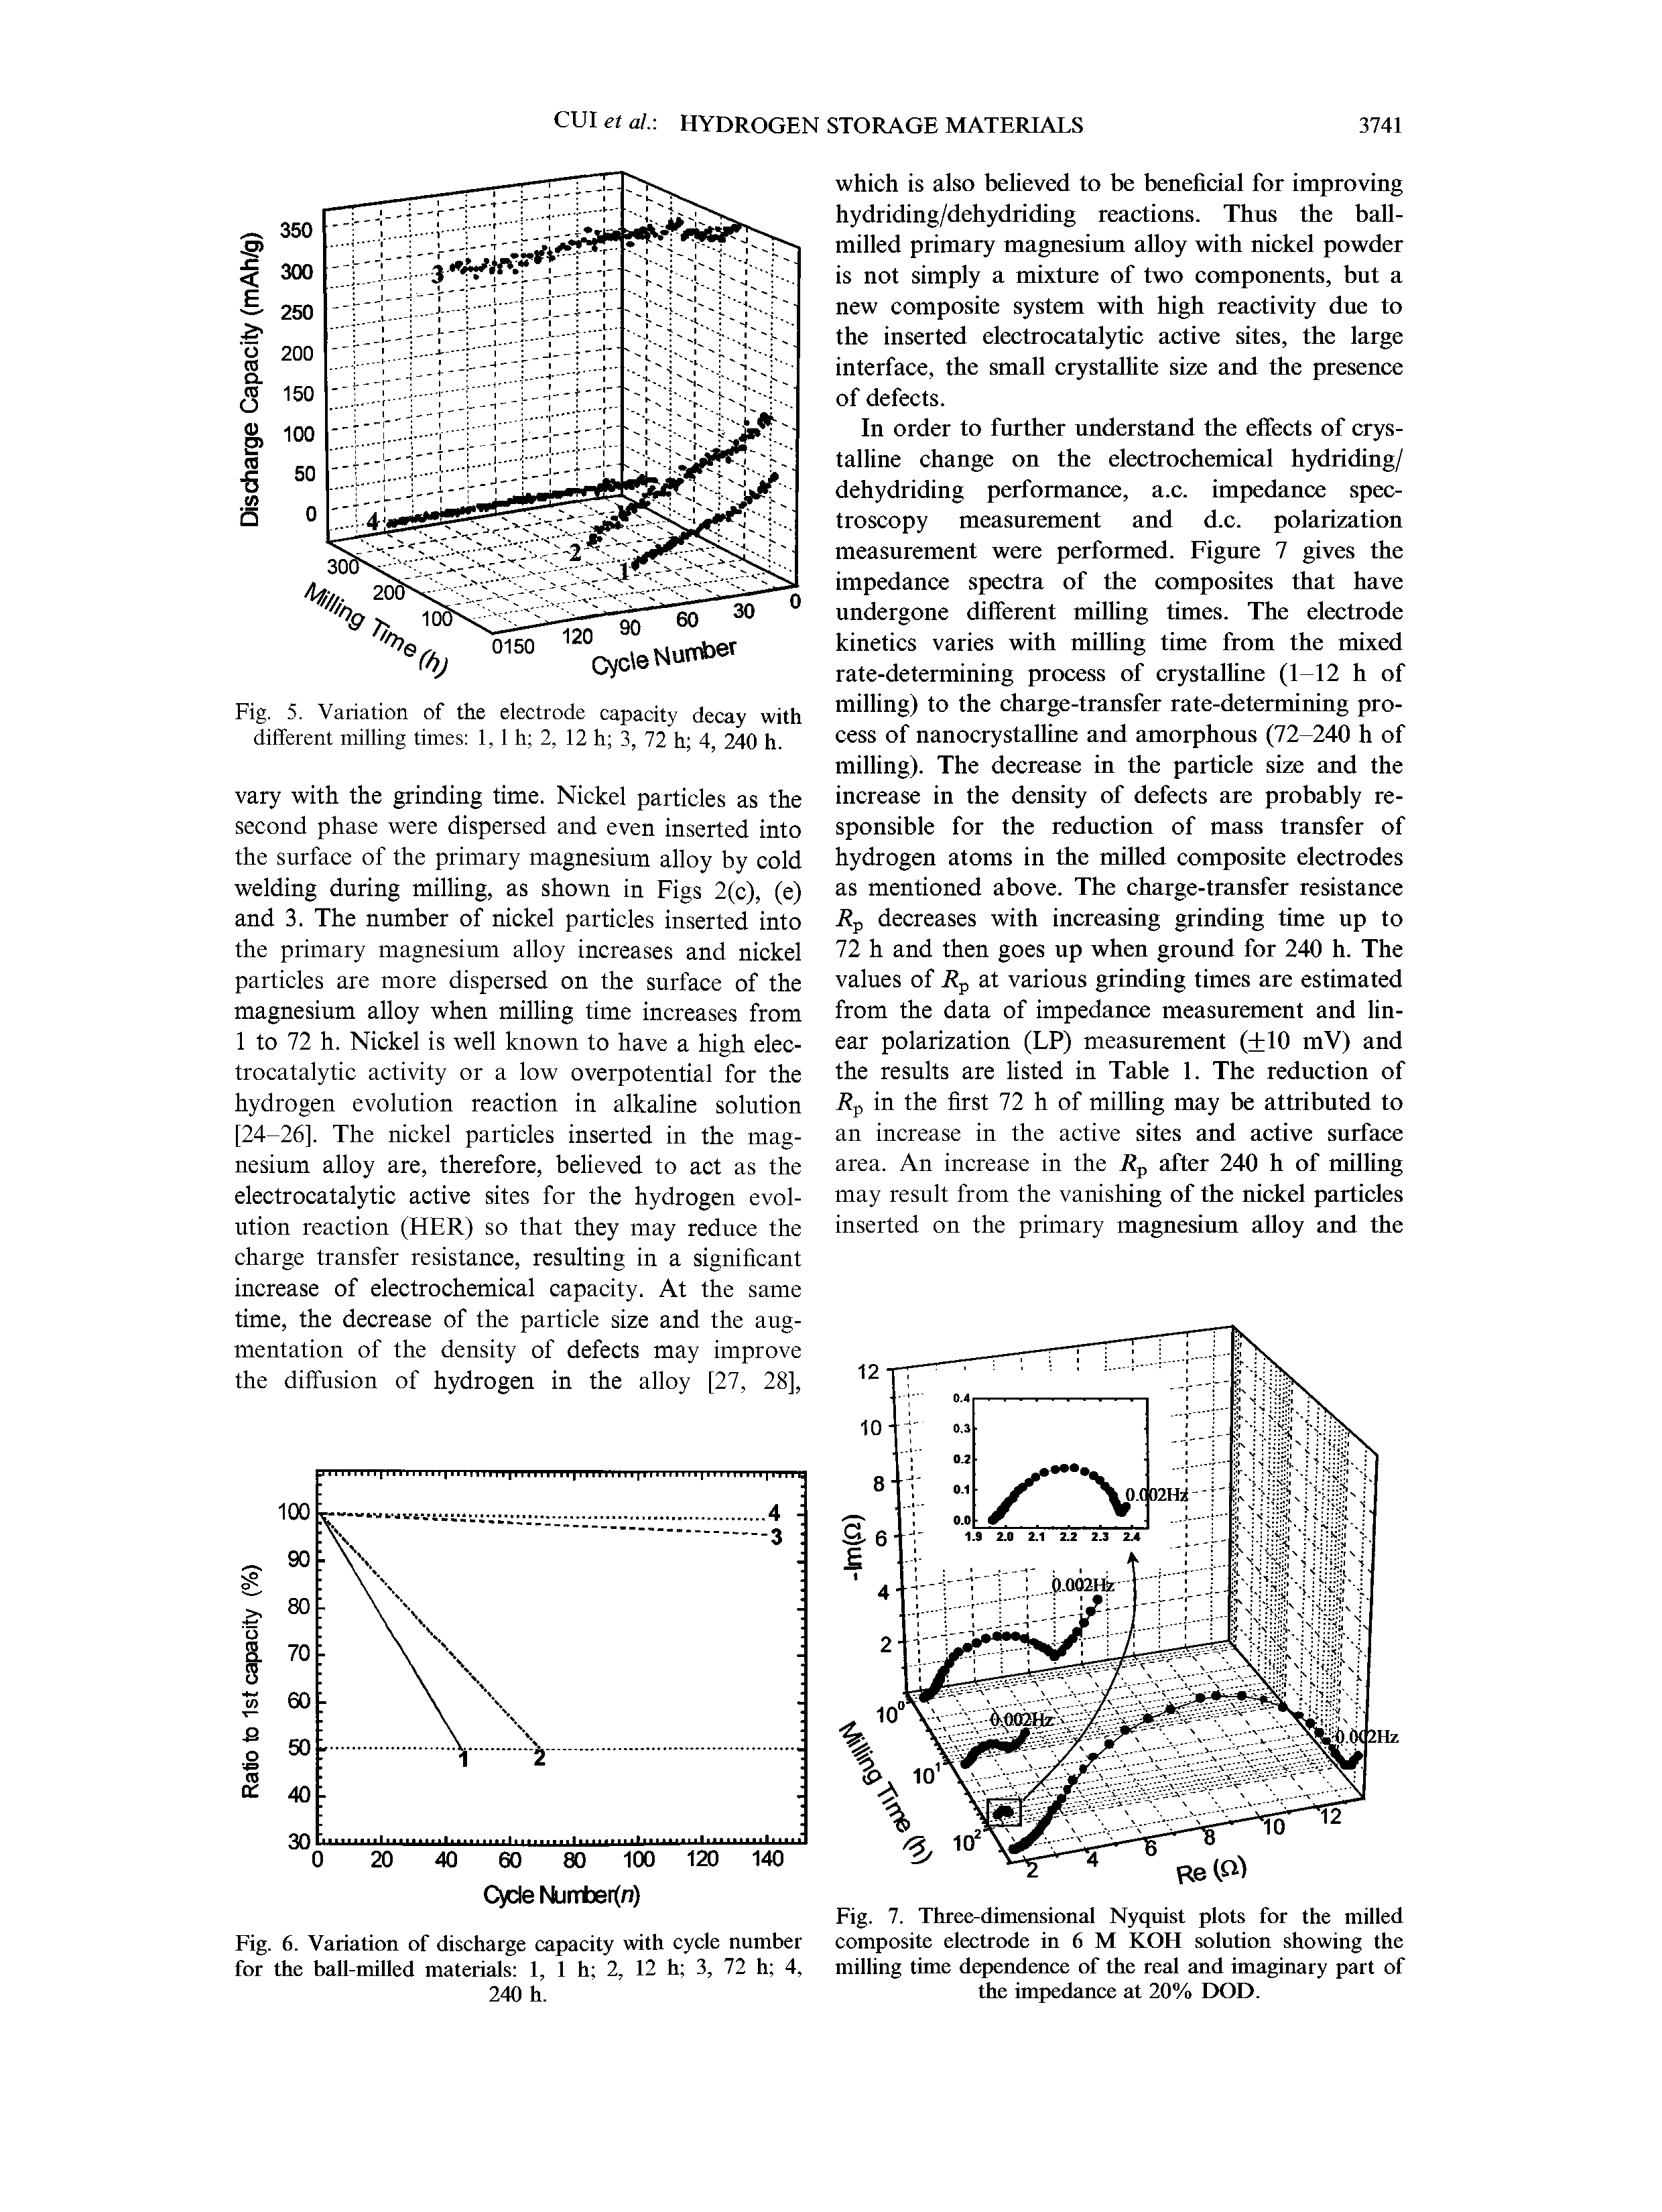 Fig. 5. Variation of the electrode capacity decay with different milling times 1, 1 h 2, 12 h 3, 72 h 4, 240 h.